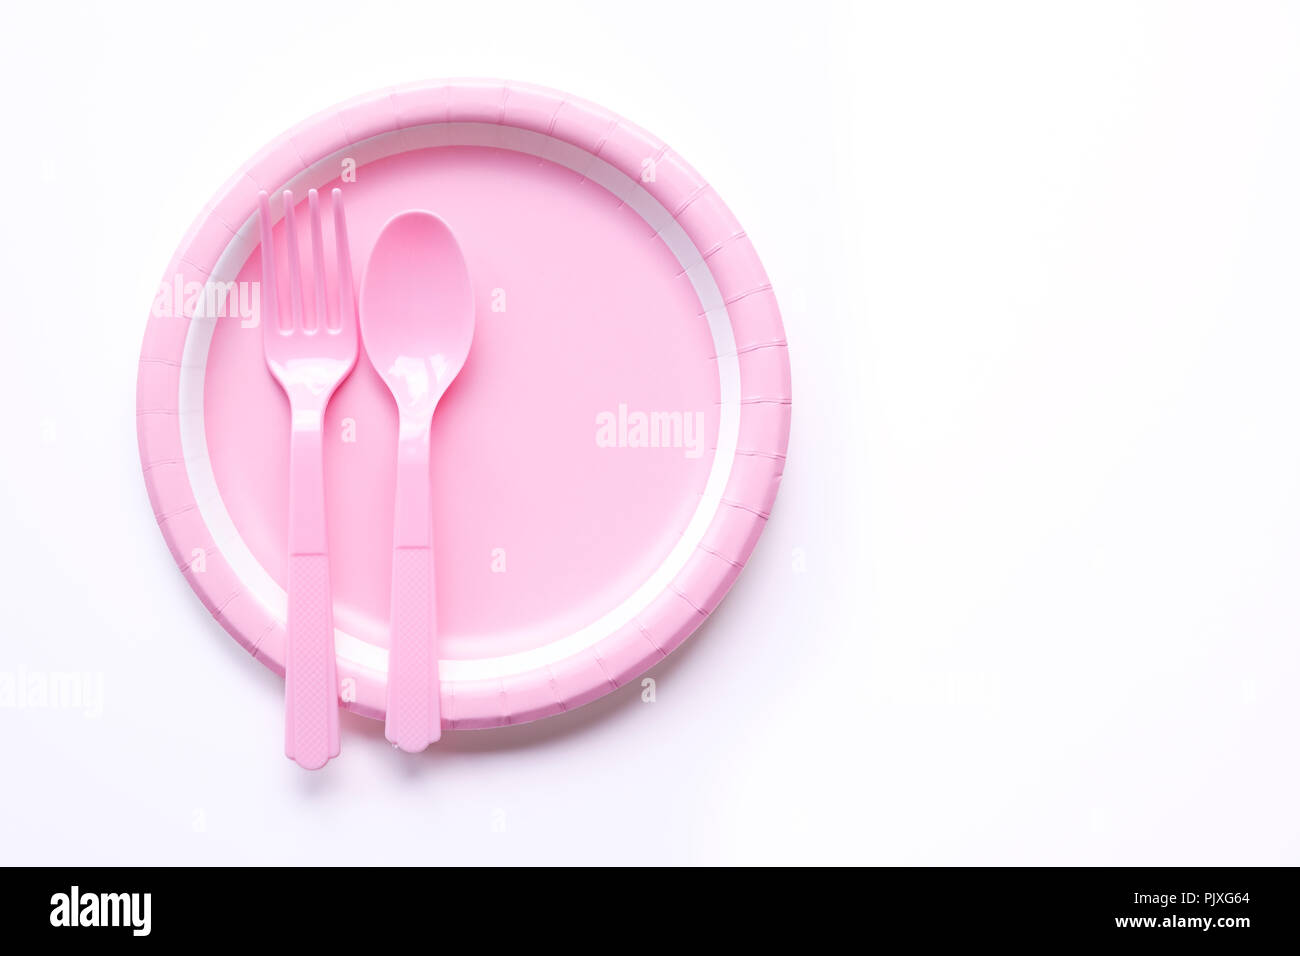 Pink color paper plate with spoon and fork Stock Photo